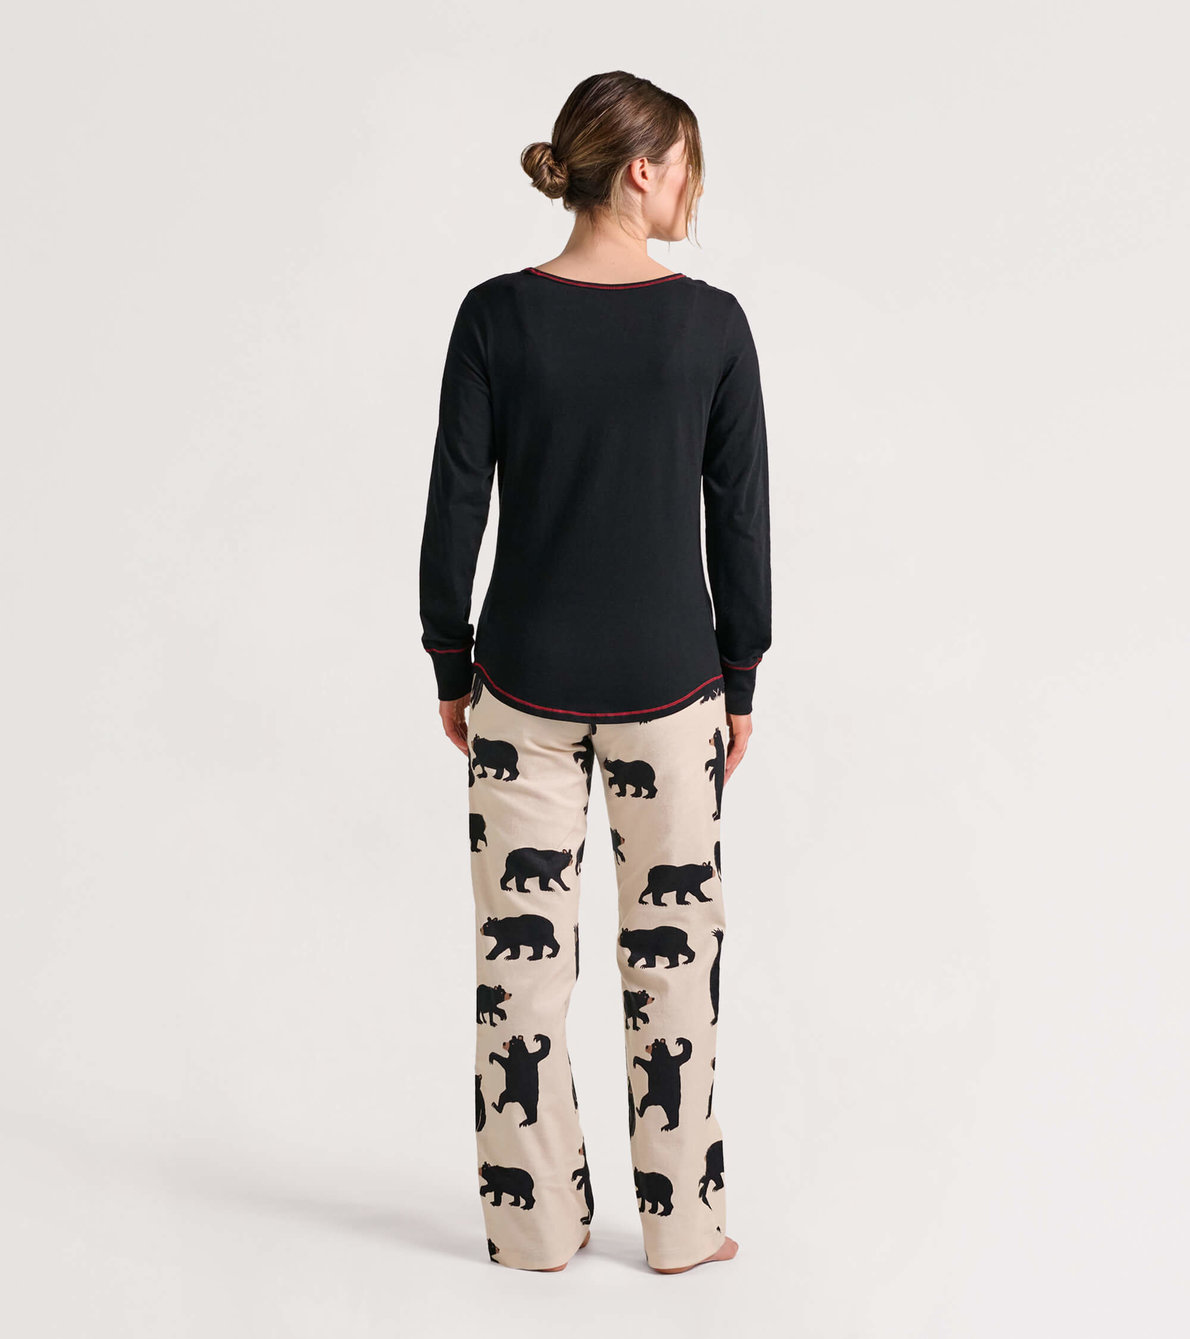 View larger image of Black Bears Women's Flannel Pajama Pants